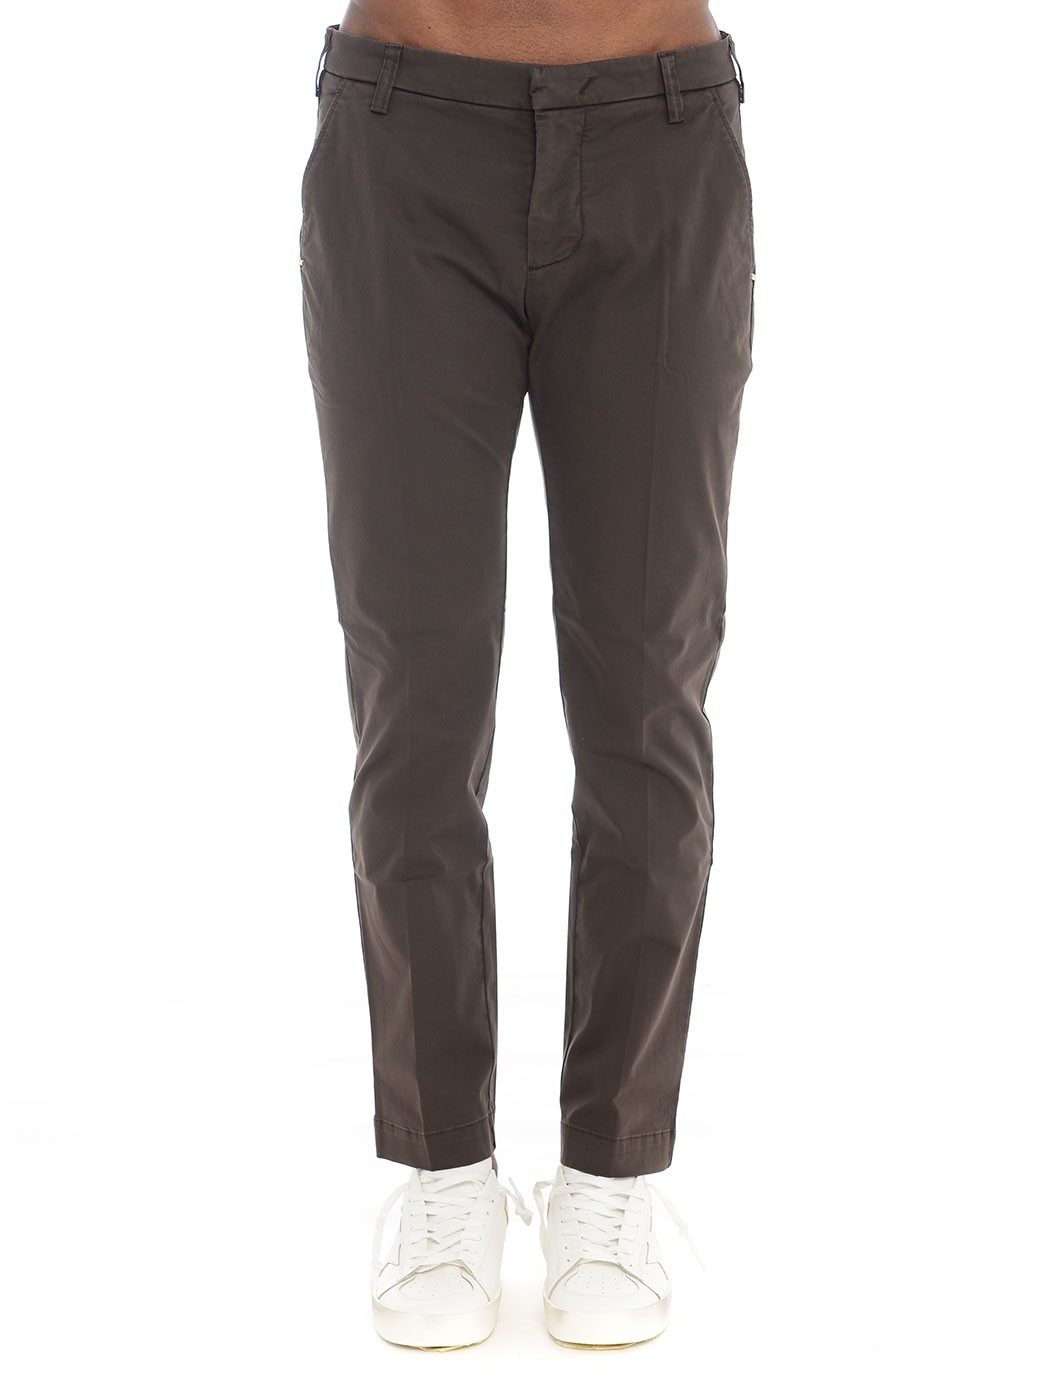  MAN TROUSERS,SPRING SUMMER TROUSERS,COTTON TROUSERS,SKIN FIT TROUSERS,INCOTEX TROUSERS,JACOB COHEN TROUSERS,NEIL BARRETT TROUSERS,MSGM TROUSERS  ENTRE AMIS 238L17